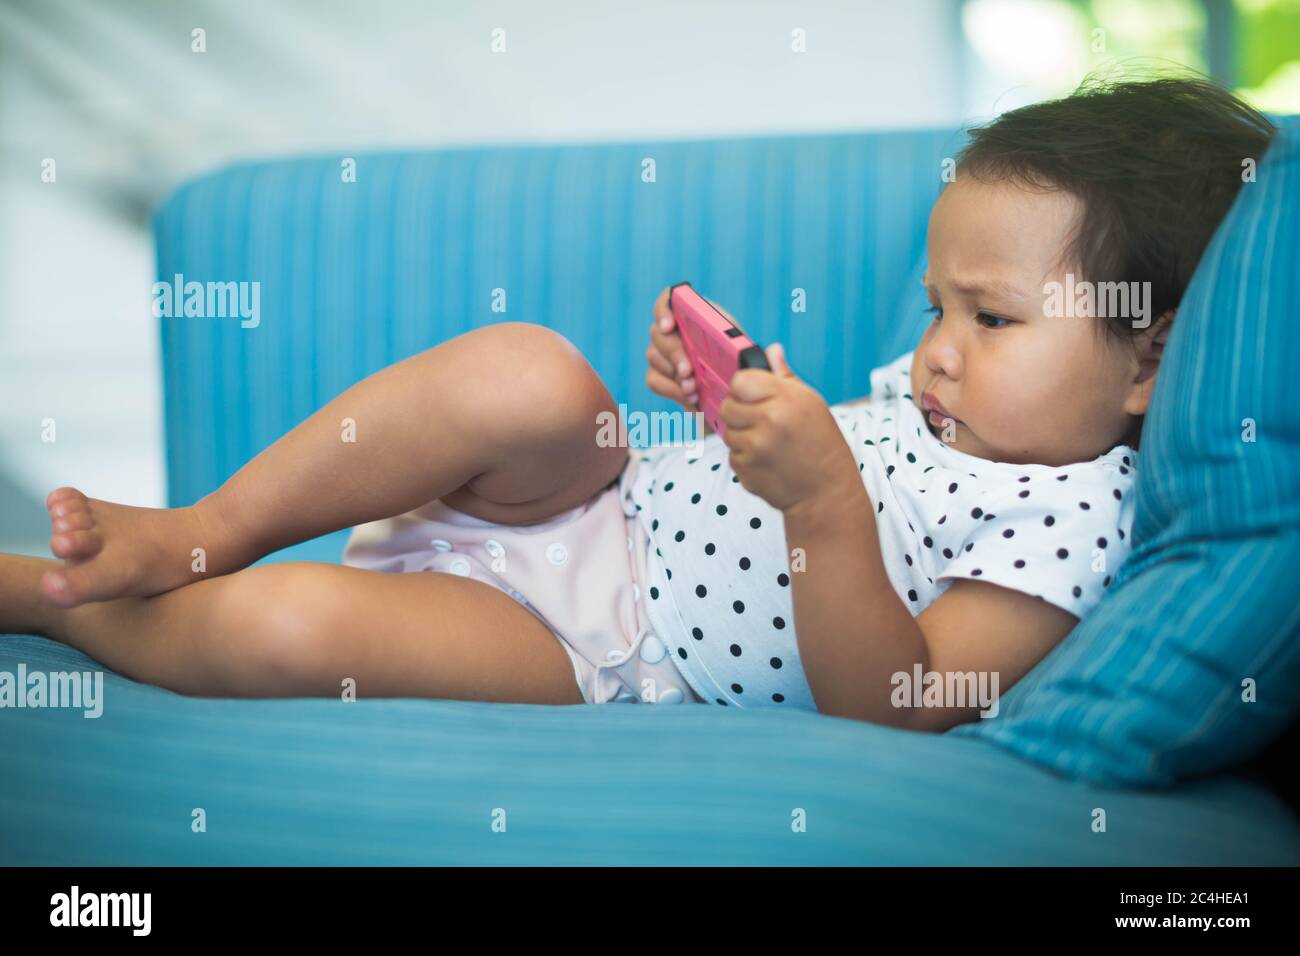 Chubby baby using a pink cell phone by herself on the sofa Stock Photo